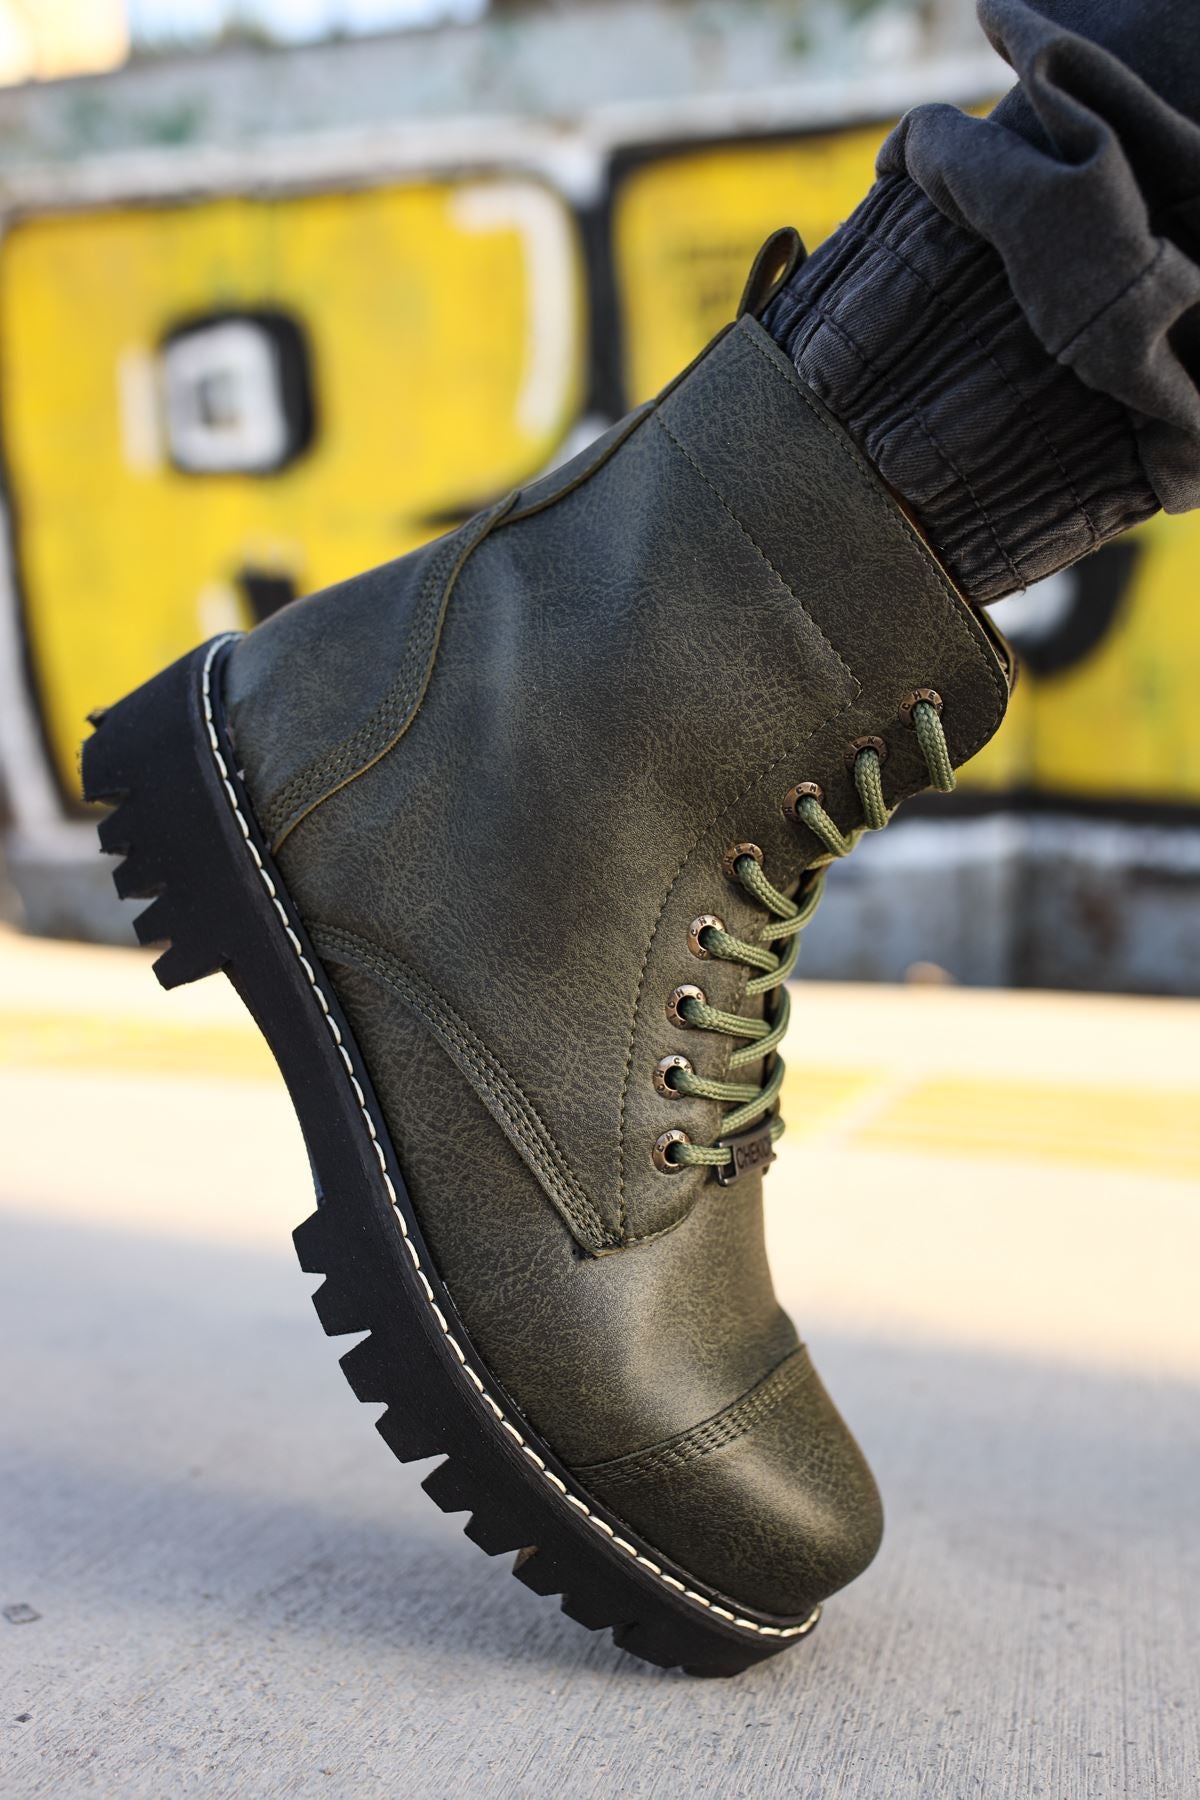 CH009 Men's Leather Khaki-Black Sole Casual Winter Boots - STREETMODE™